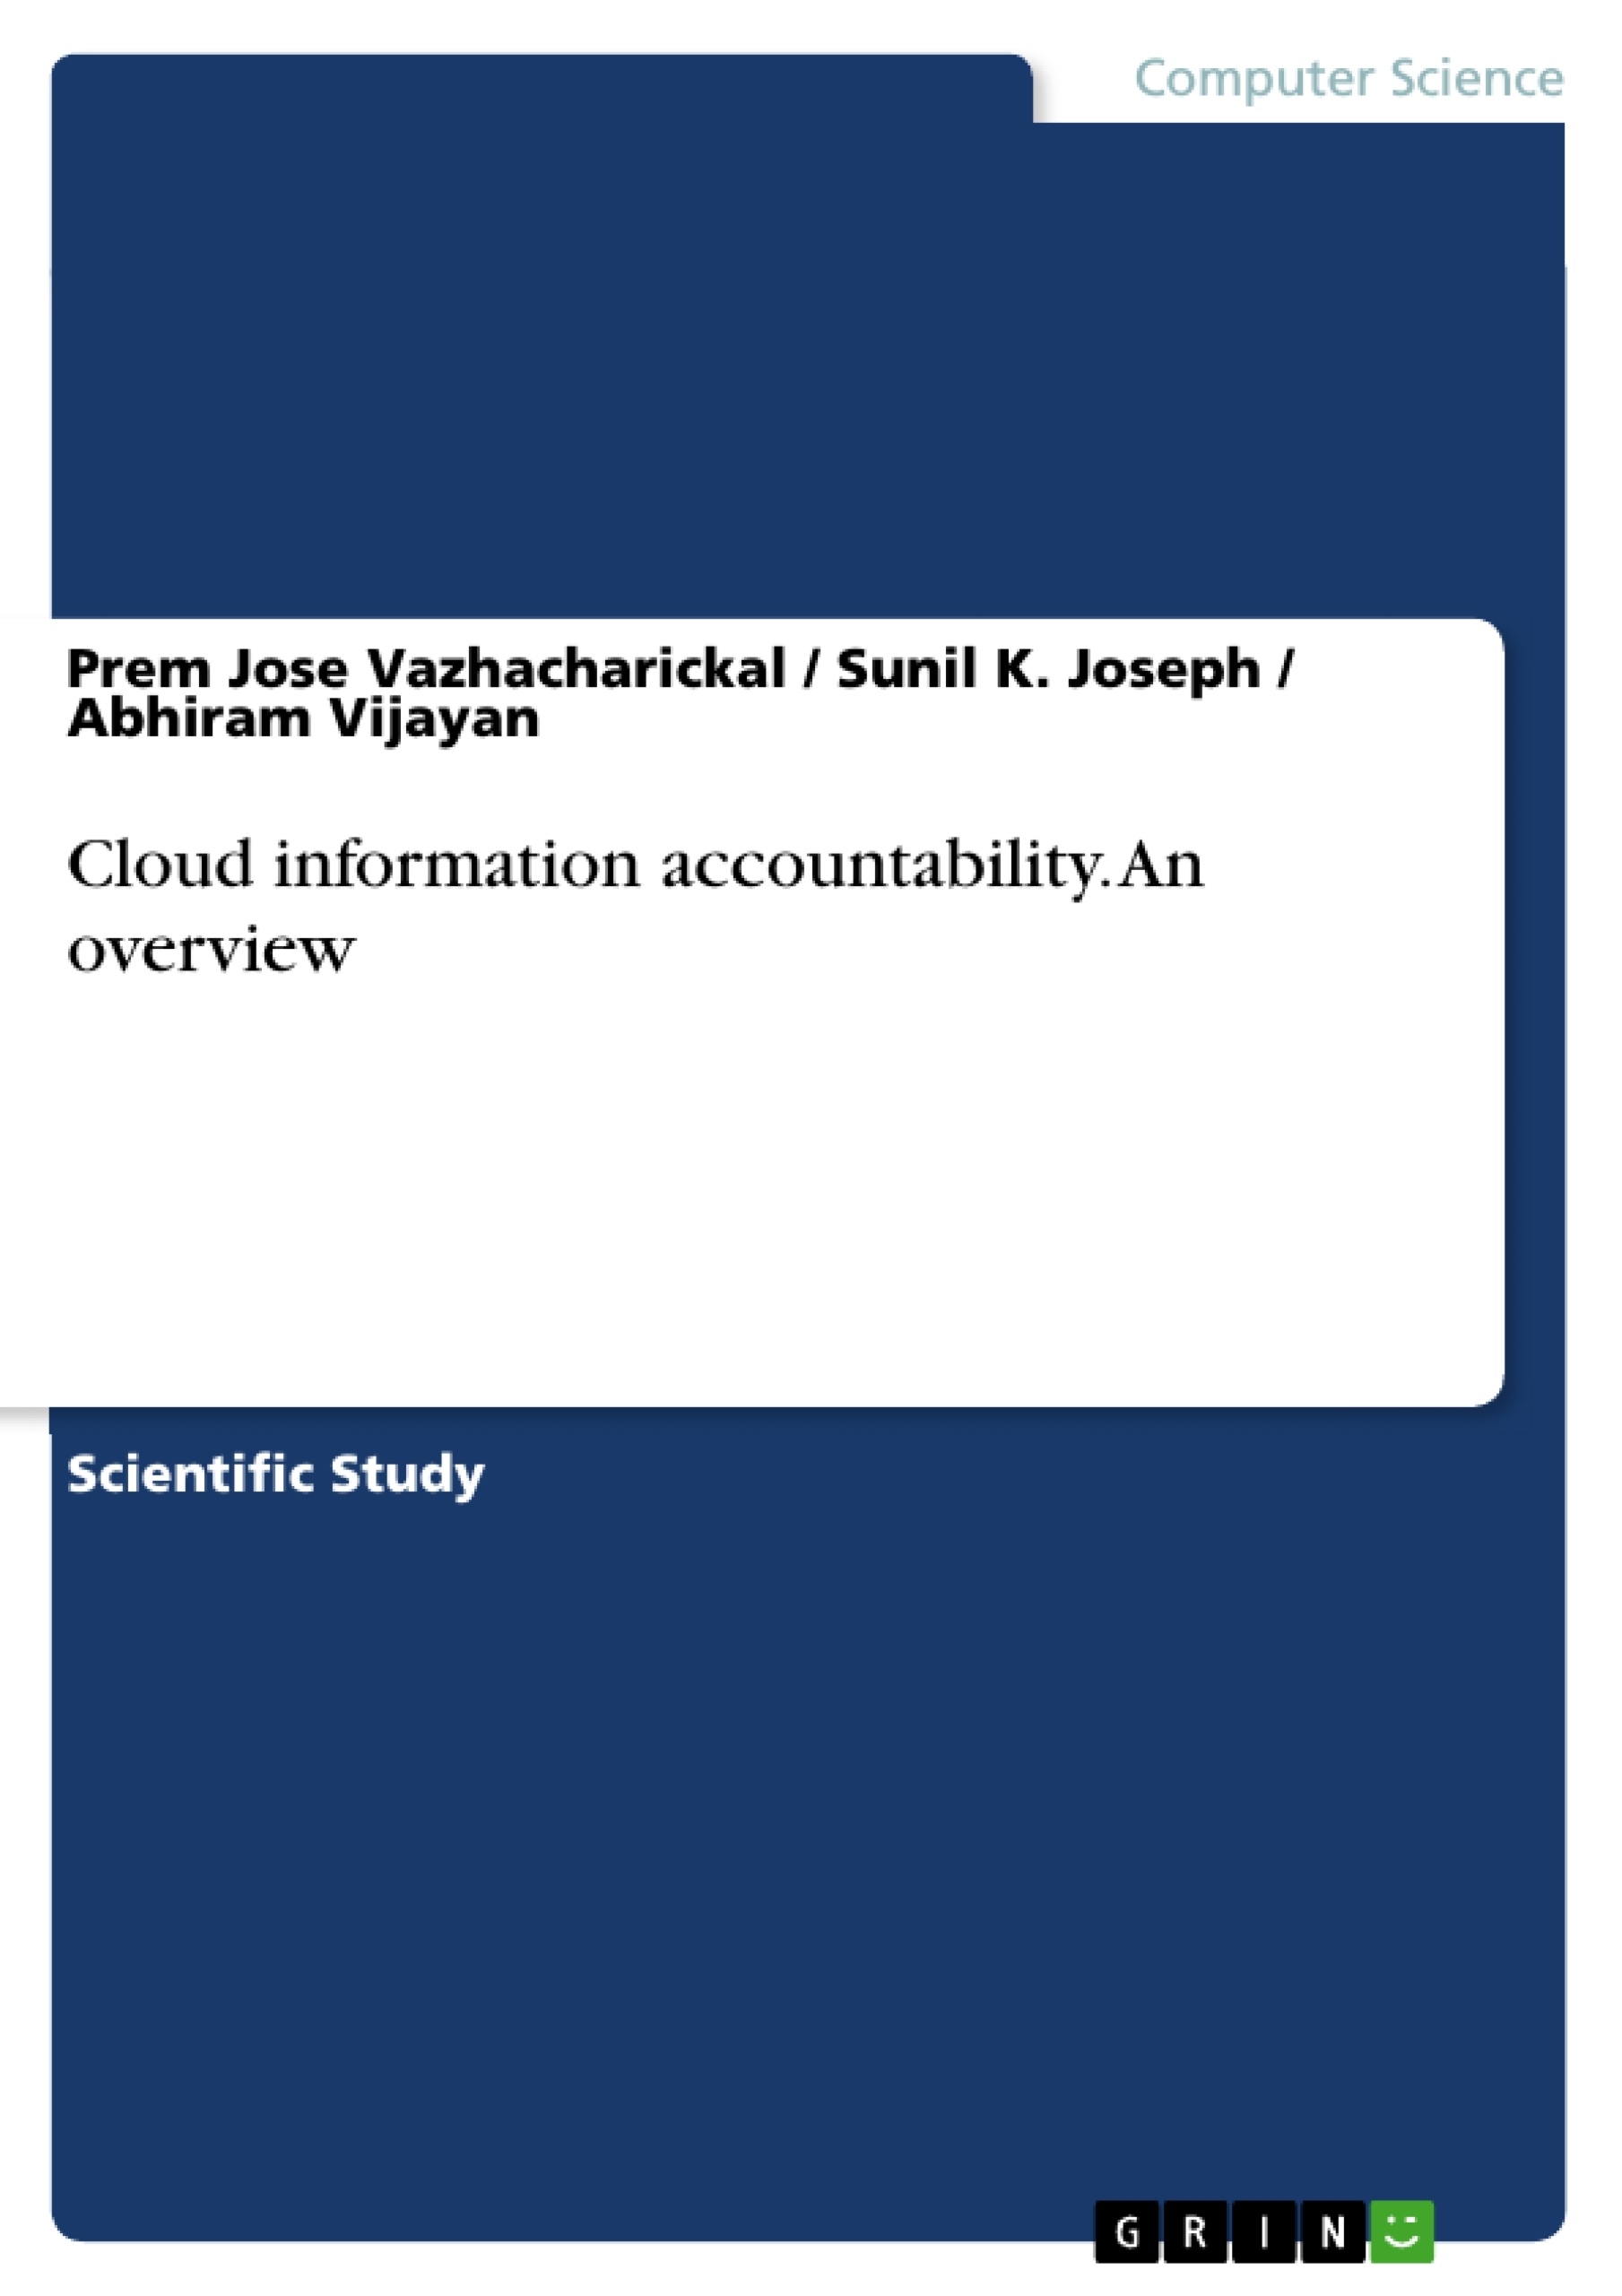 Titre: Cloud information accountability. An overview